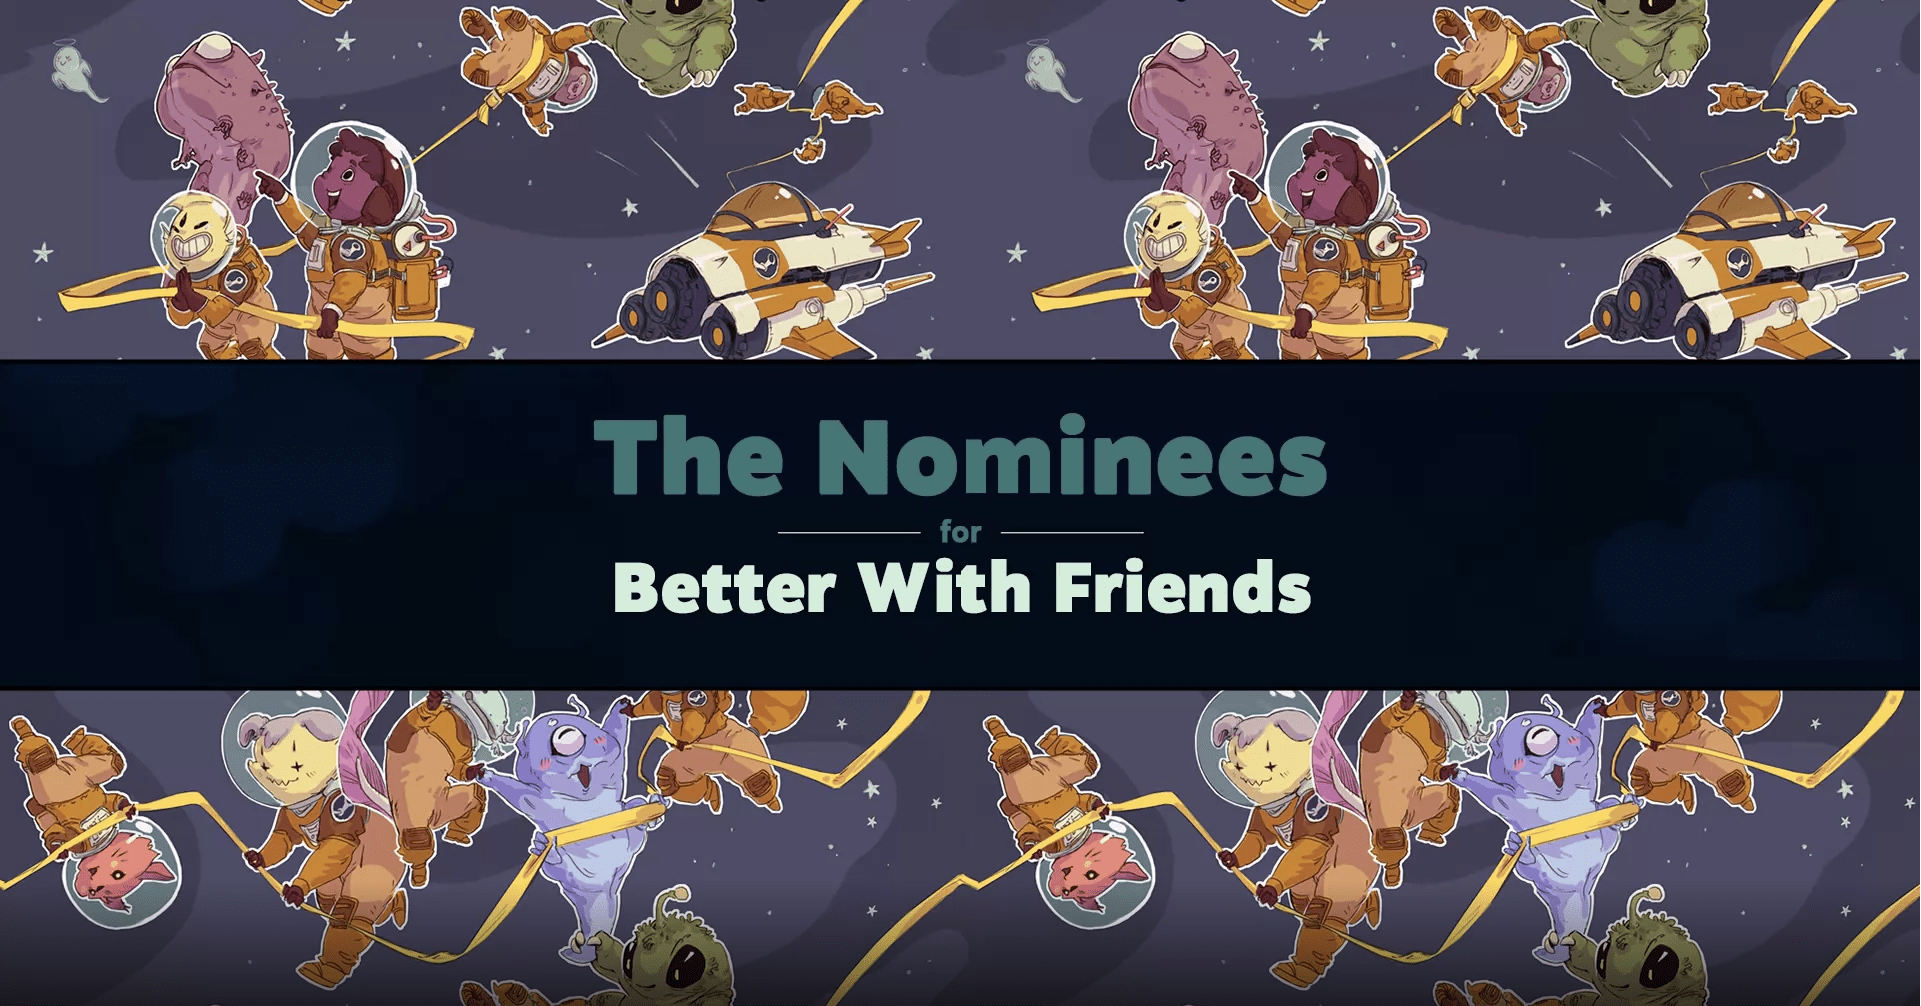 Steam Awards 2019 Fan Voted Nominees Revealed for Category ‘Better With Friends’